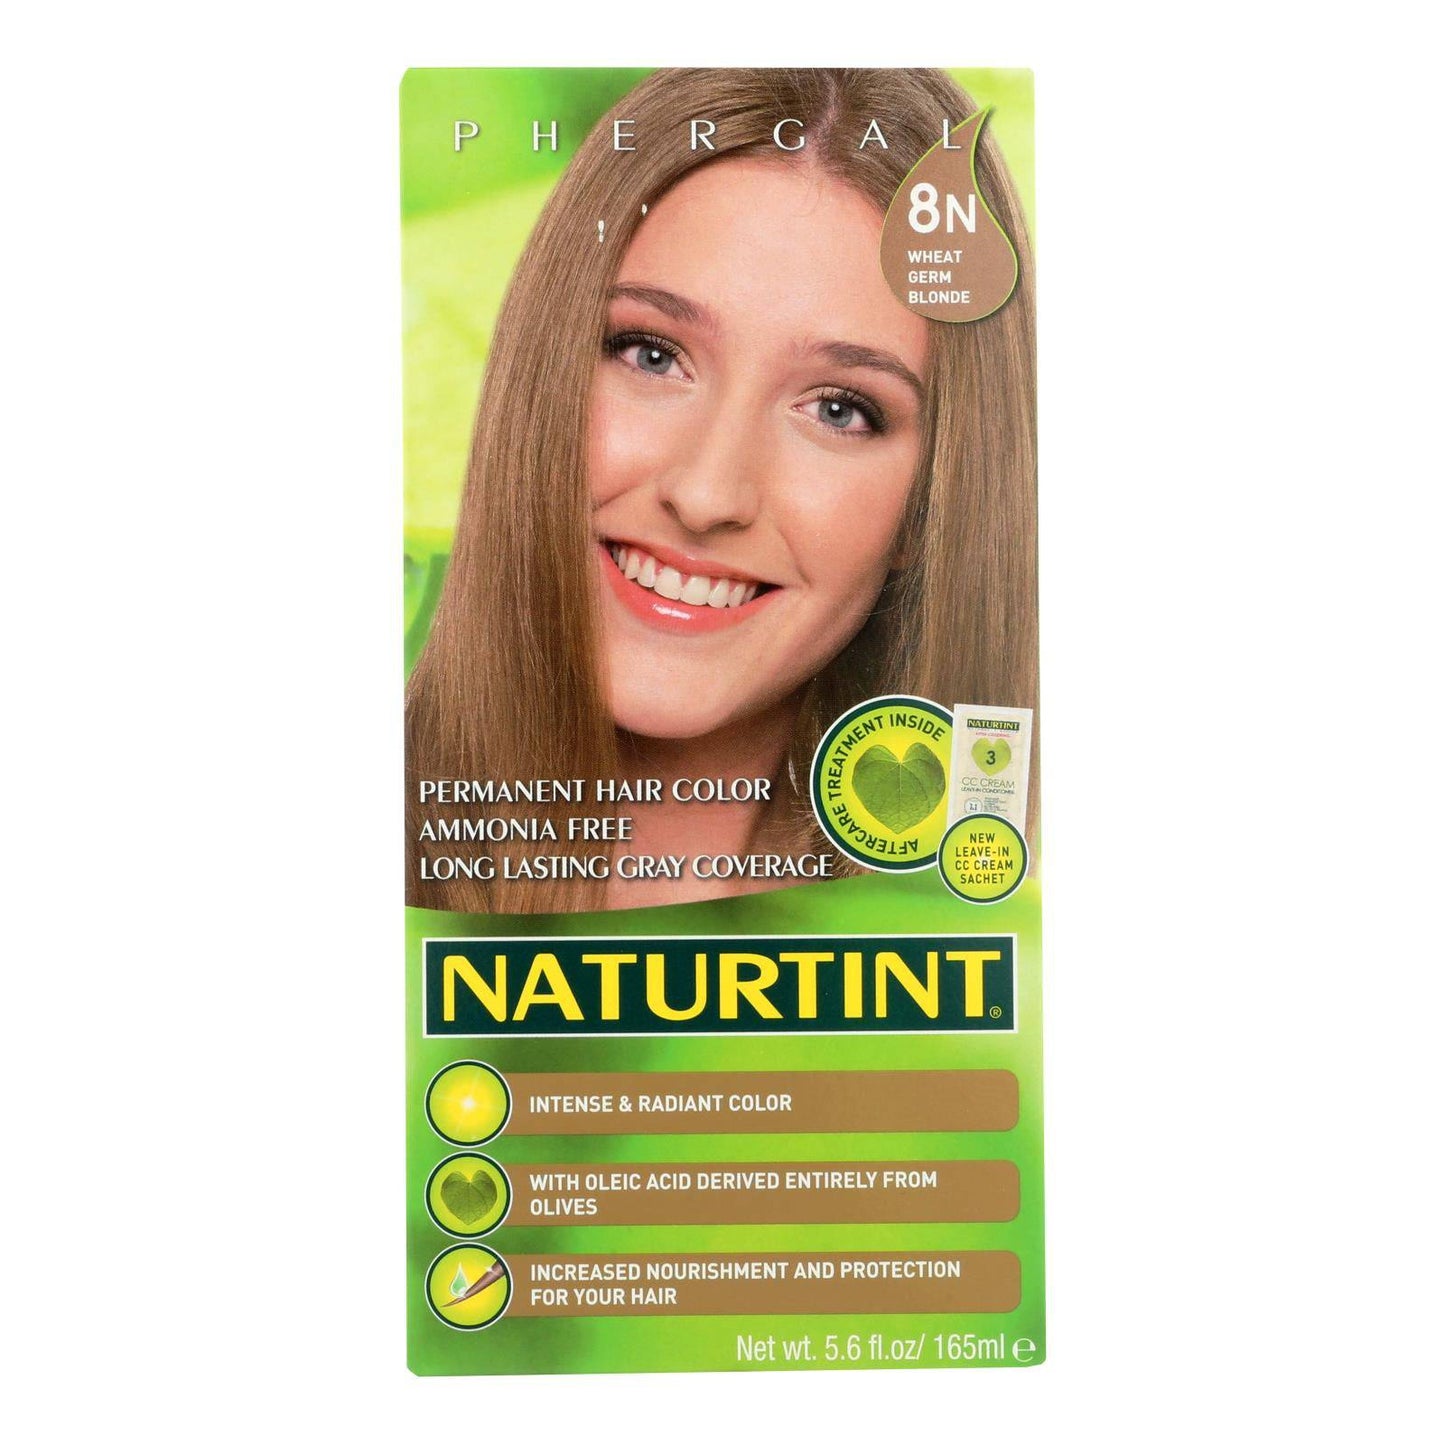 Buy Naturtint Hair Color - Permanent - 8n - Wheat Germ Blonde - 5.28 Oz  at OnlyNaturals.us